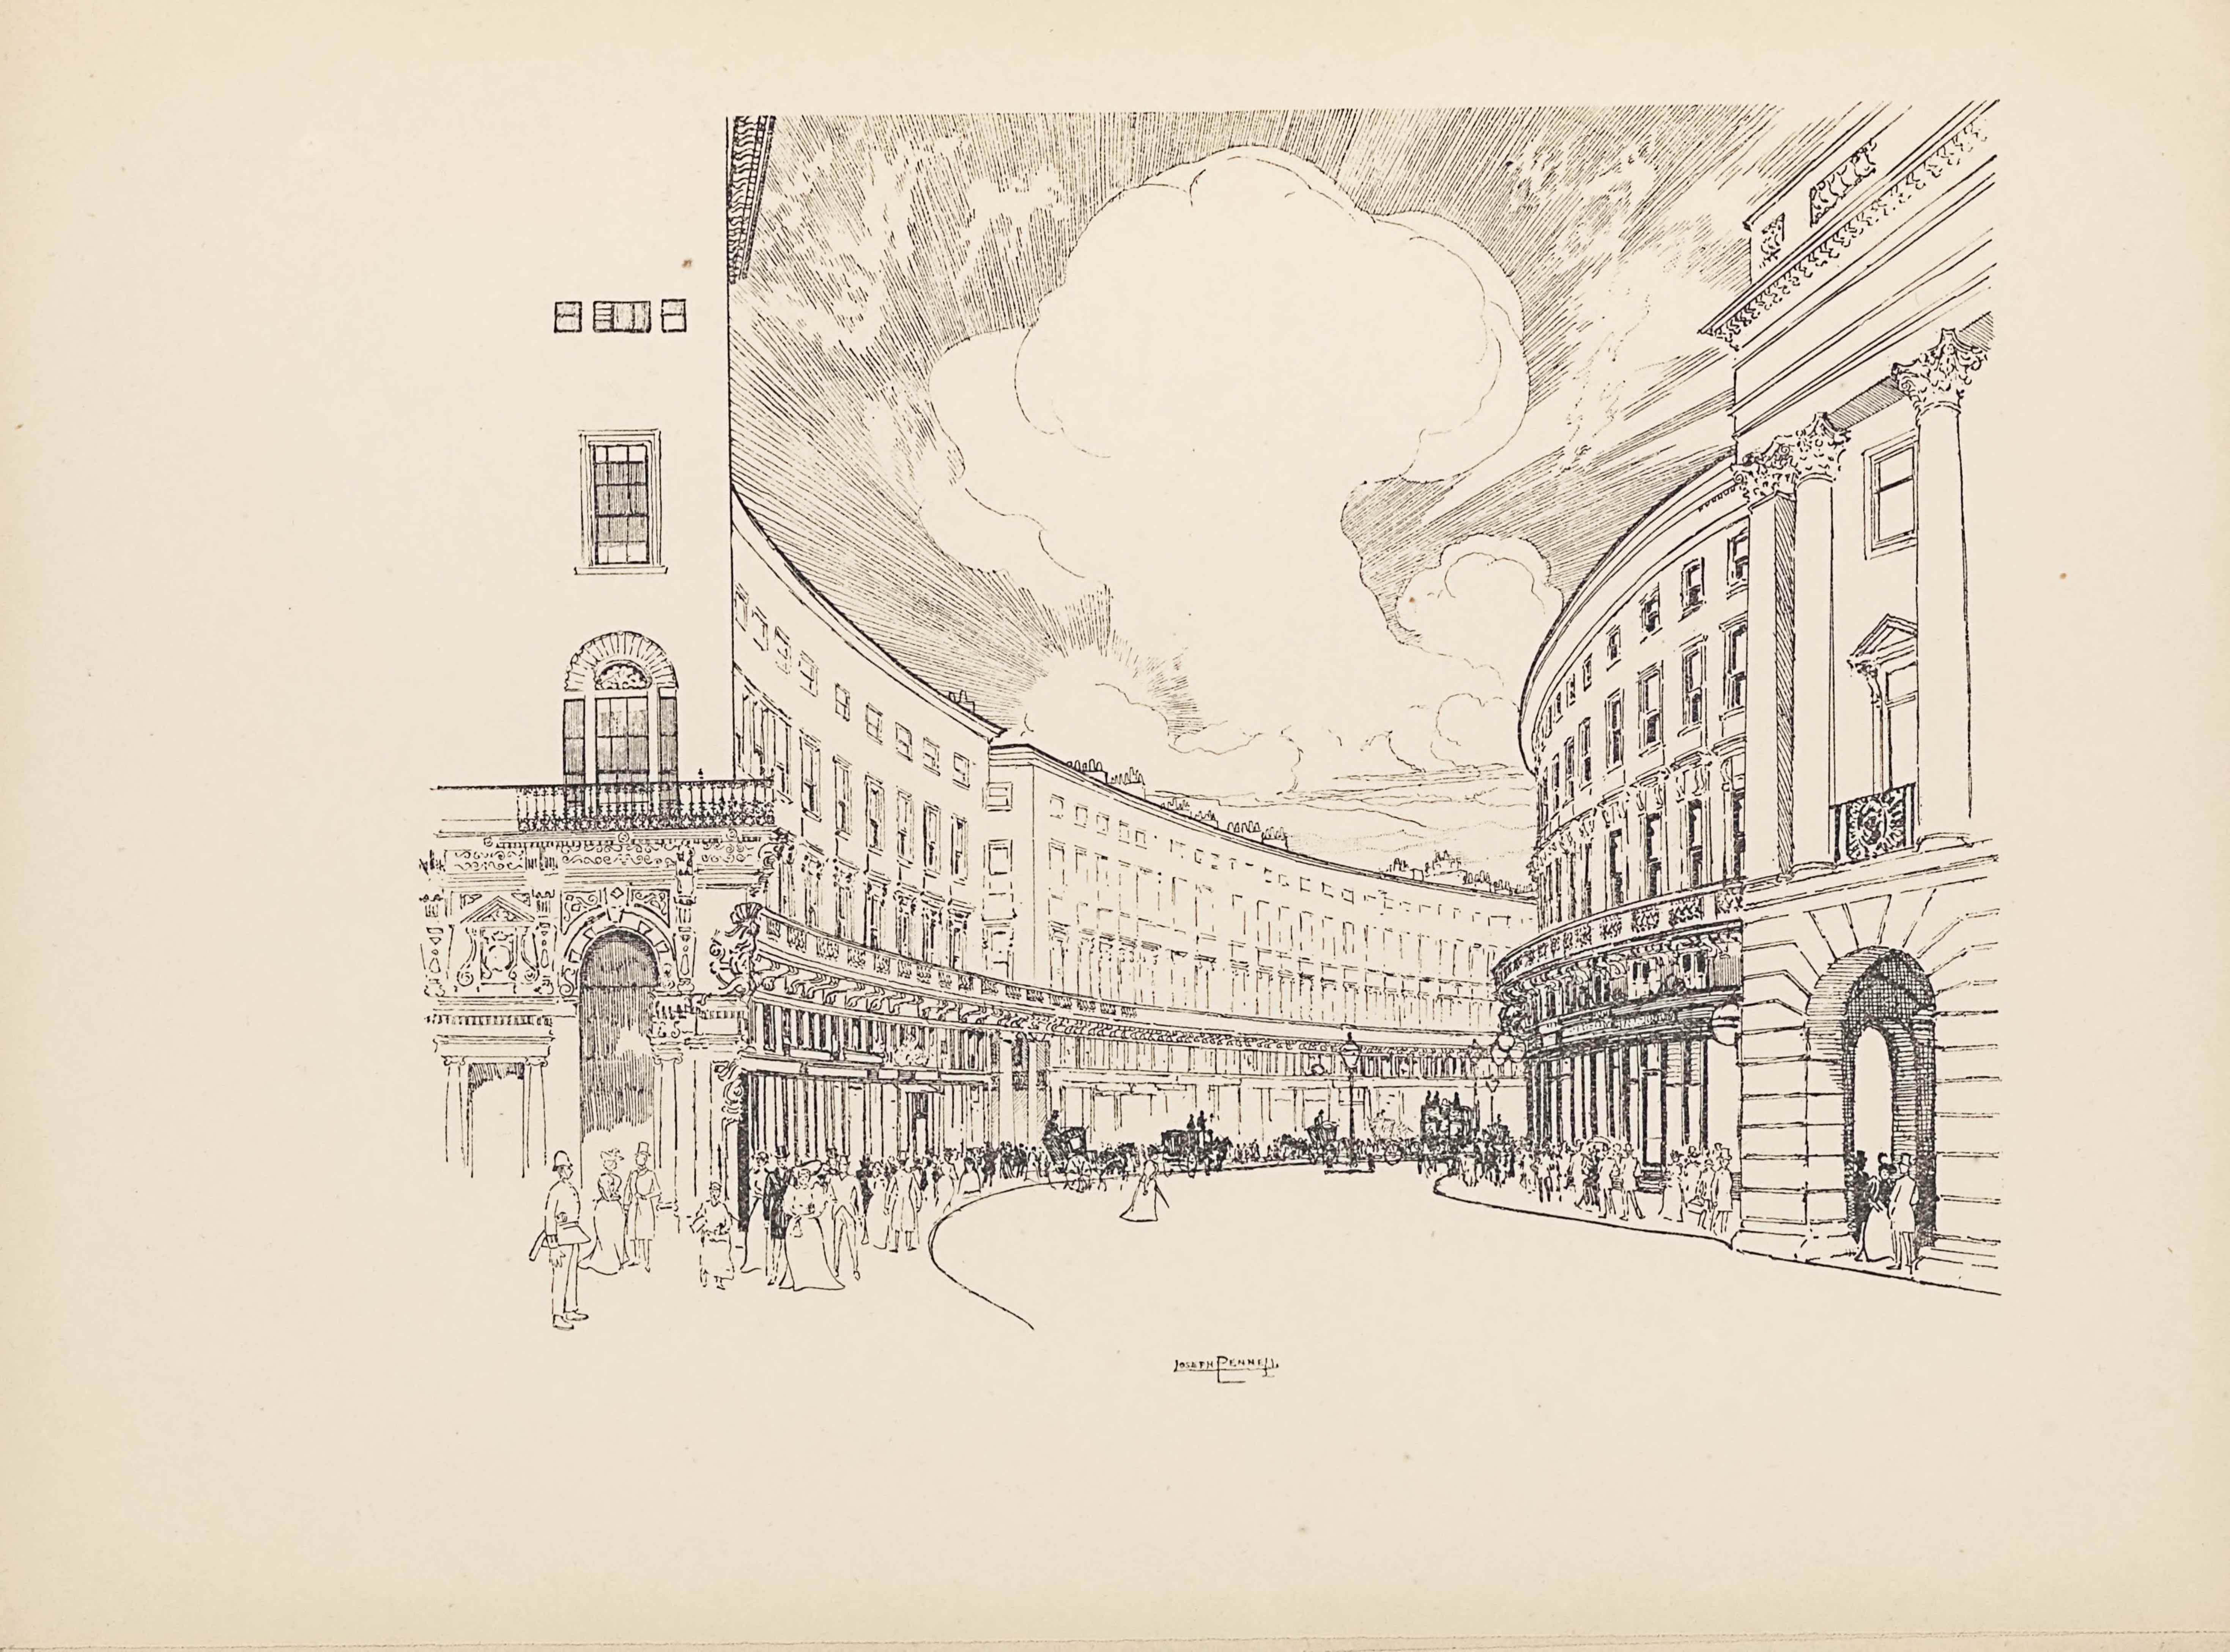 The line block reproduction of a pen-and-ink drawing is landscape oriented. The image is a street view of Regent Street in London, from the perspective of a pedestrian on the sidewalk. The side of a building is seen from this perspective with an arched doorway and ornamented detailing above in the stone work. Above the doorway sits a balcony with an arched door leading out. A window sits above the balcony, and a set of three windows appear above. To the right of the building is a sidewalk and then the road, which travels straight towards the mid-ground and then curves off to the right. Many pedestrians line the sidewalk in front of the building, which curves along the left side of the road. The building ends, leaving a slight gap before the next identical building begins and follows the same curve out of sight. On the opposite side of the road is a mirrored sidewalk and building set-up. The building entrance on the far right is comprised of a large archway made of big blocks of stone. A set of three pillars is situated on top of the arch, and support a protruding roof. Windows line the front of the buildings on both sides of the street in three rows, with smaller windows in the top row. Along the side of the buildings on the left, about a third of the way up, train tracks run along the curve. In the sky that takes up the central background of the image, a large cloud that looks mushroom-like is blooming up, and the sky around seems to be exploding outwards in straight lines. Aligned in the centre on the bottom edge of the image is the text: “JOSEPH PENNELL” [caps]. There is no border around the image.